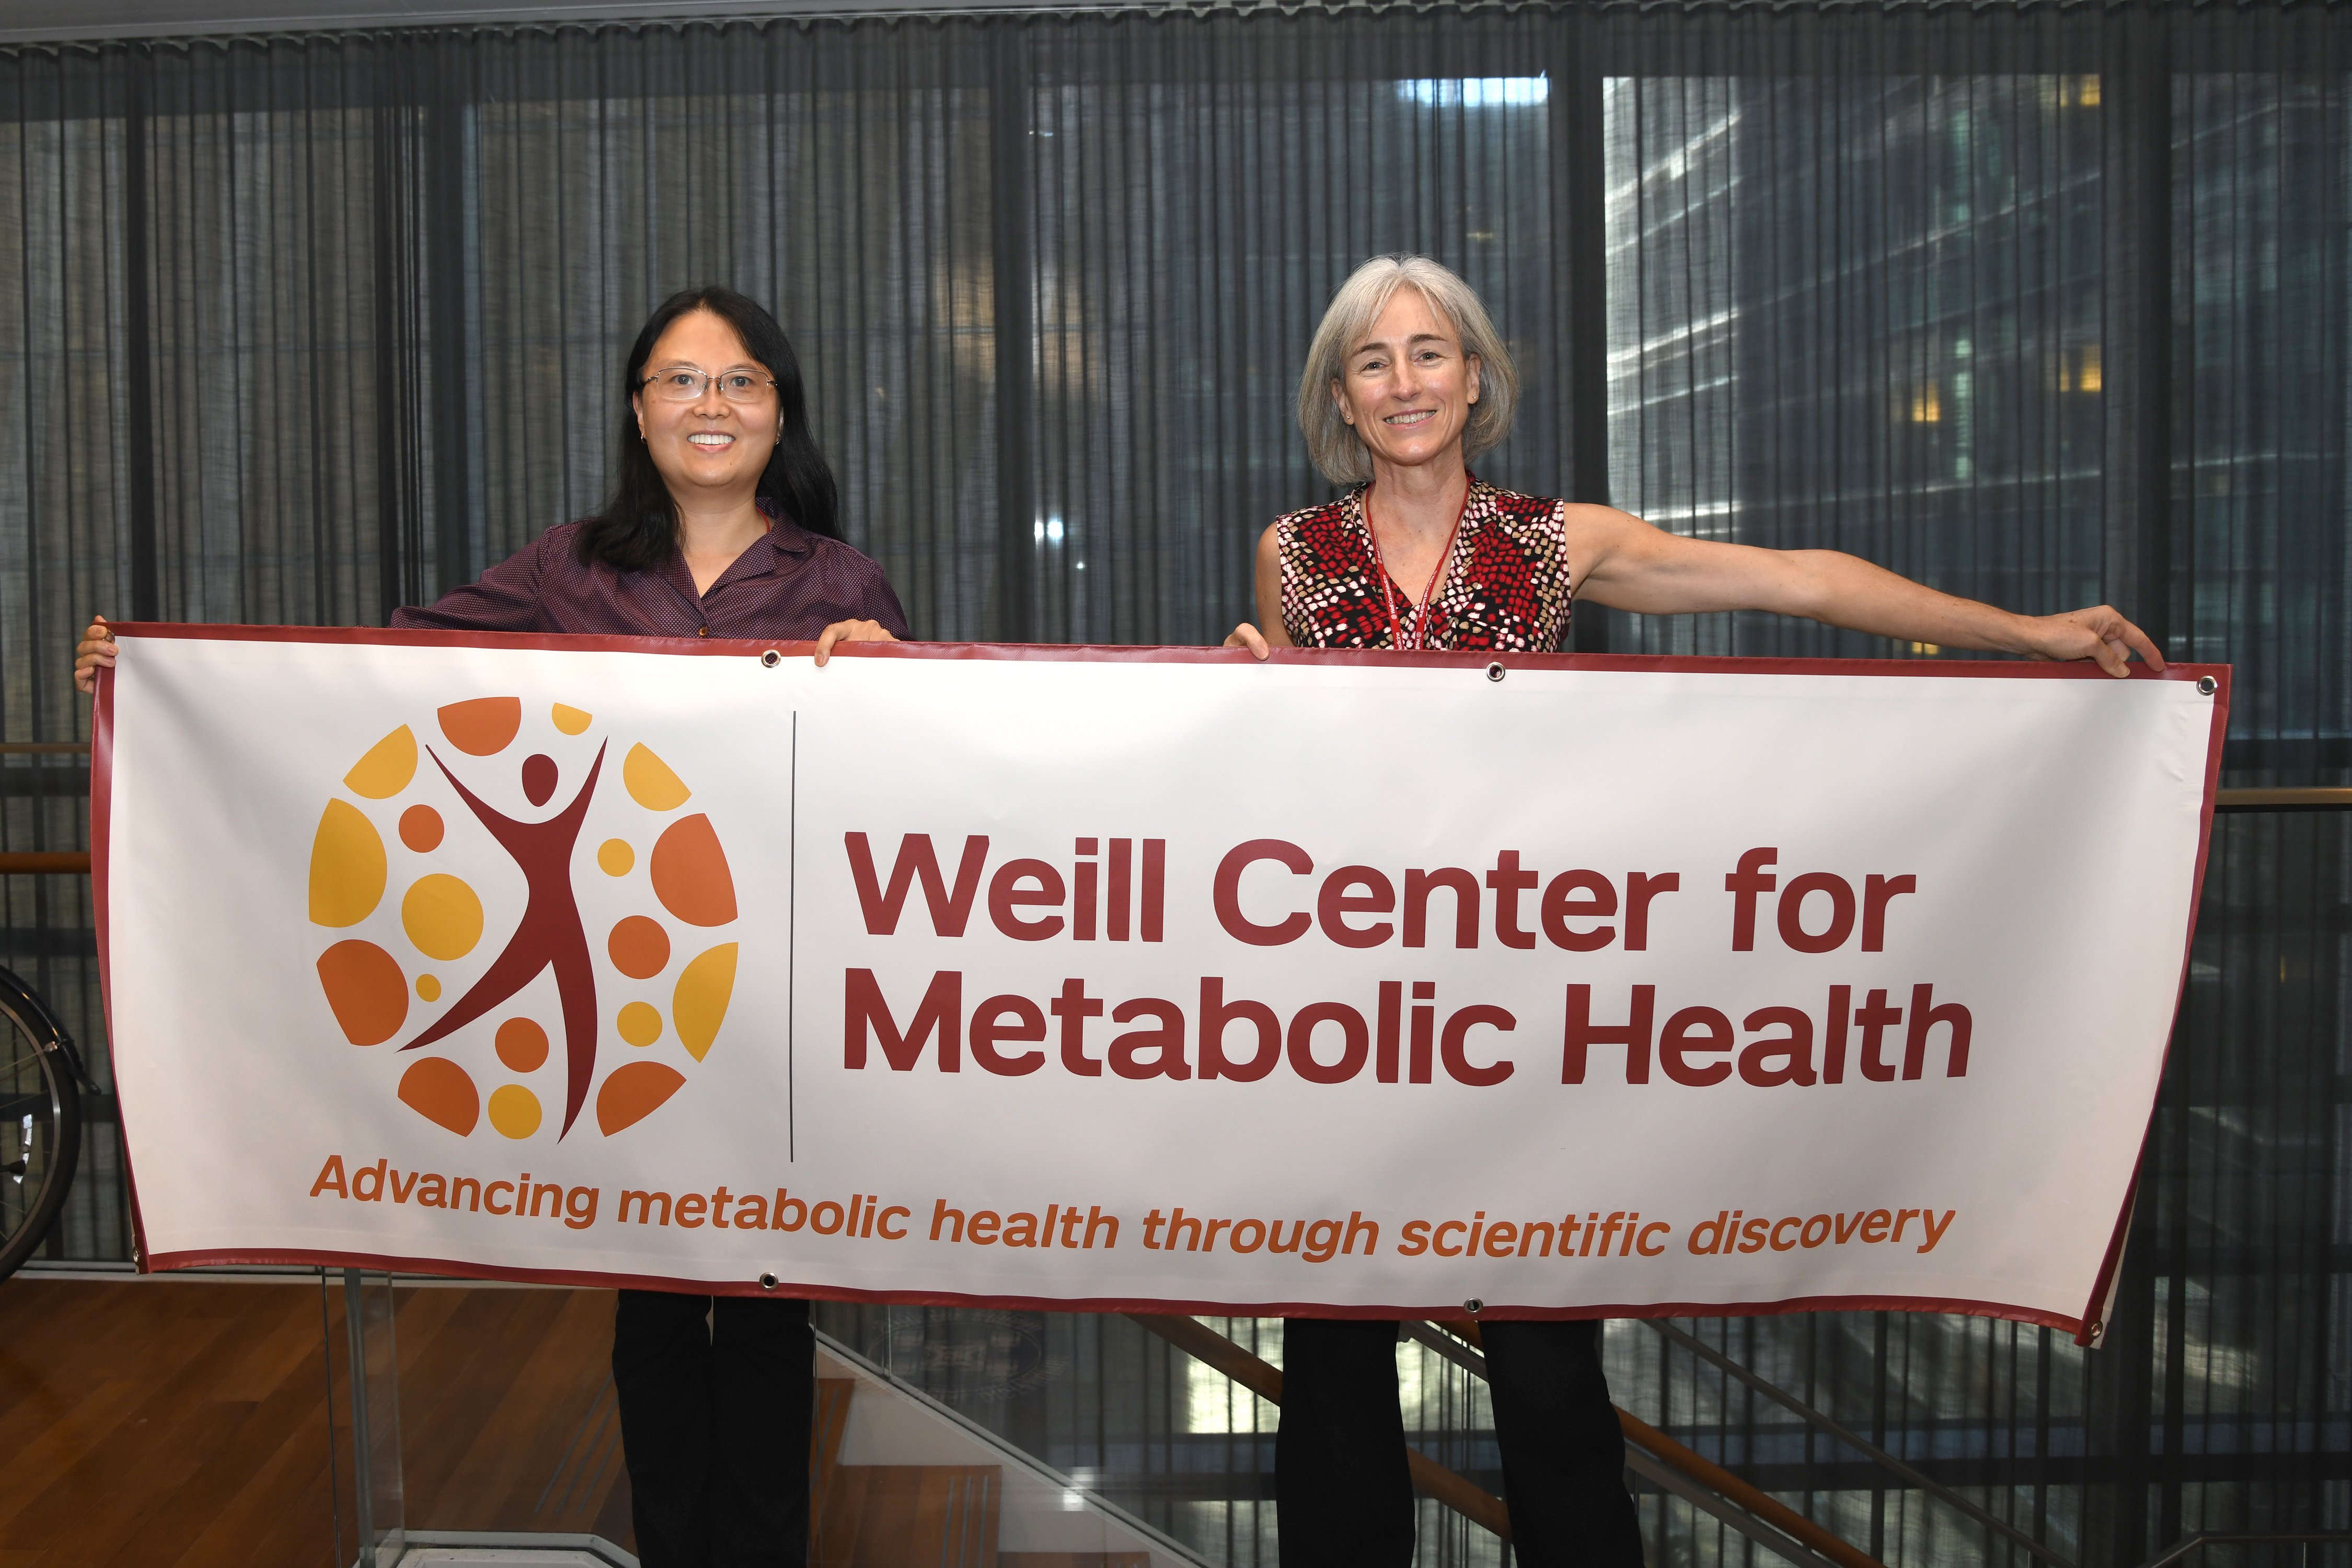 Weill Center for Metabolic Health